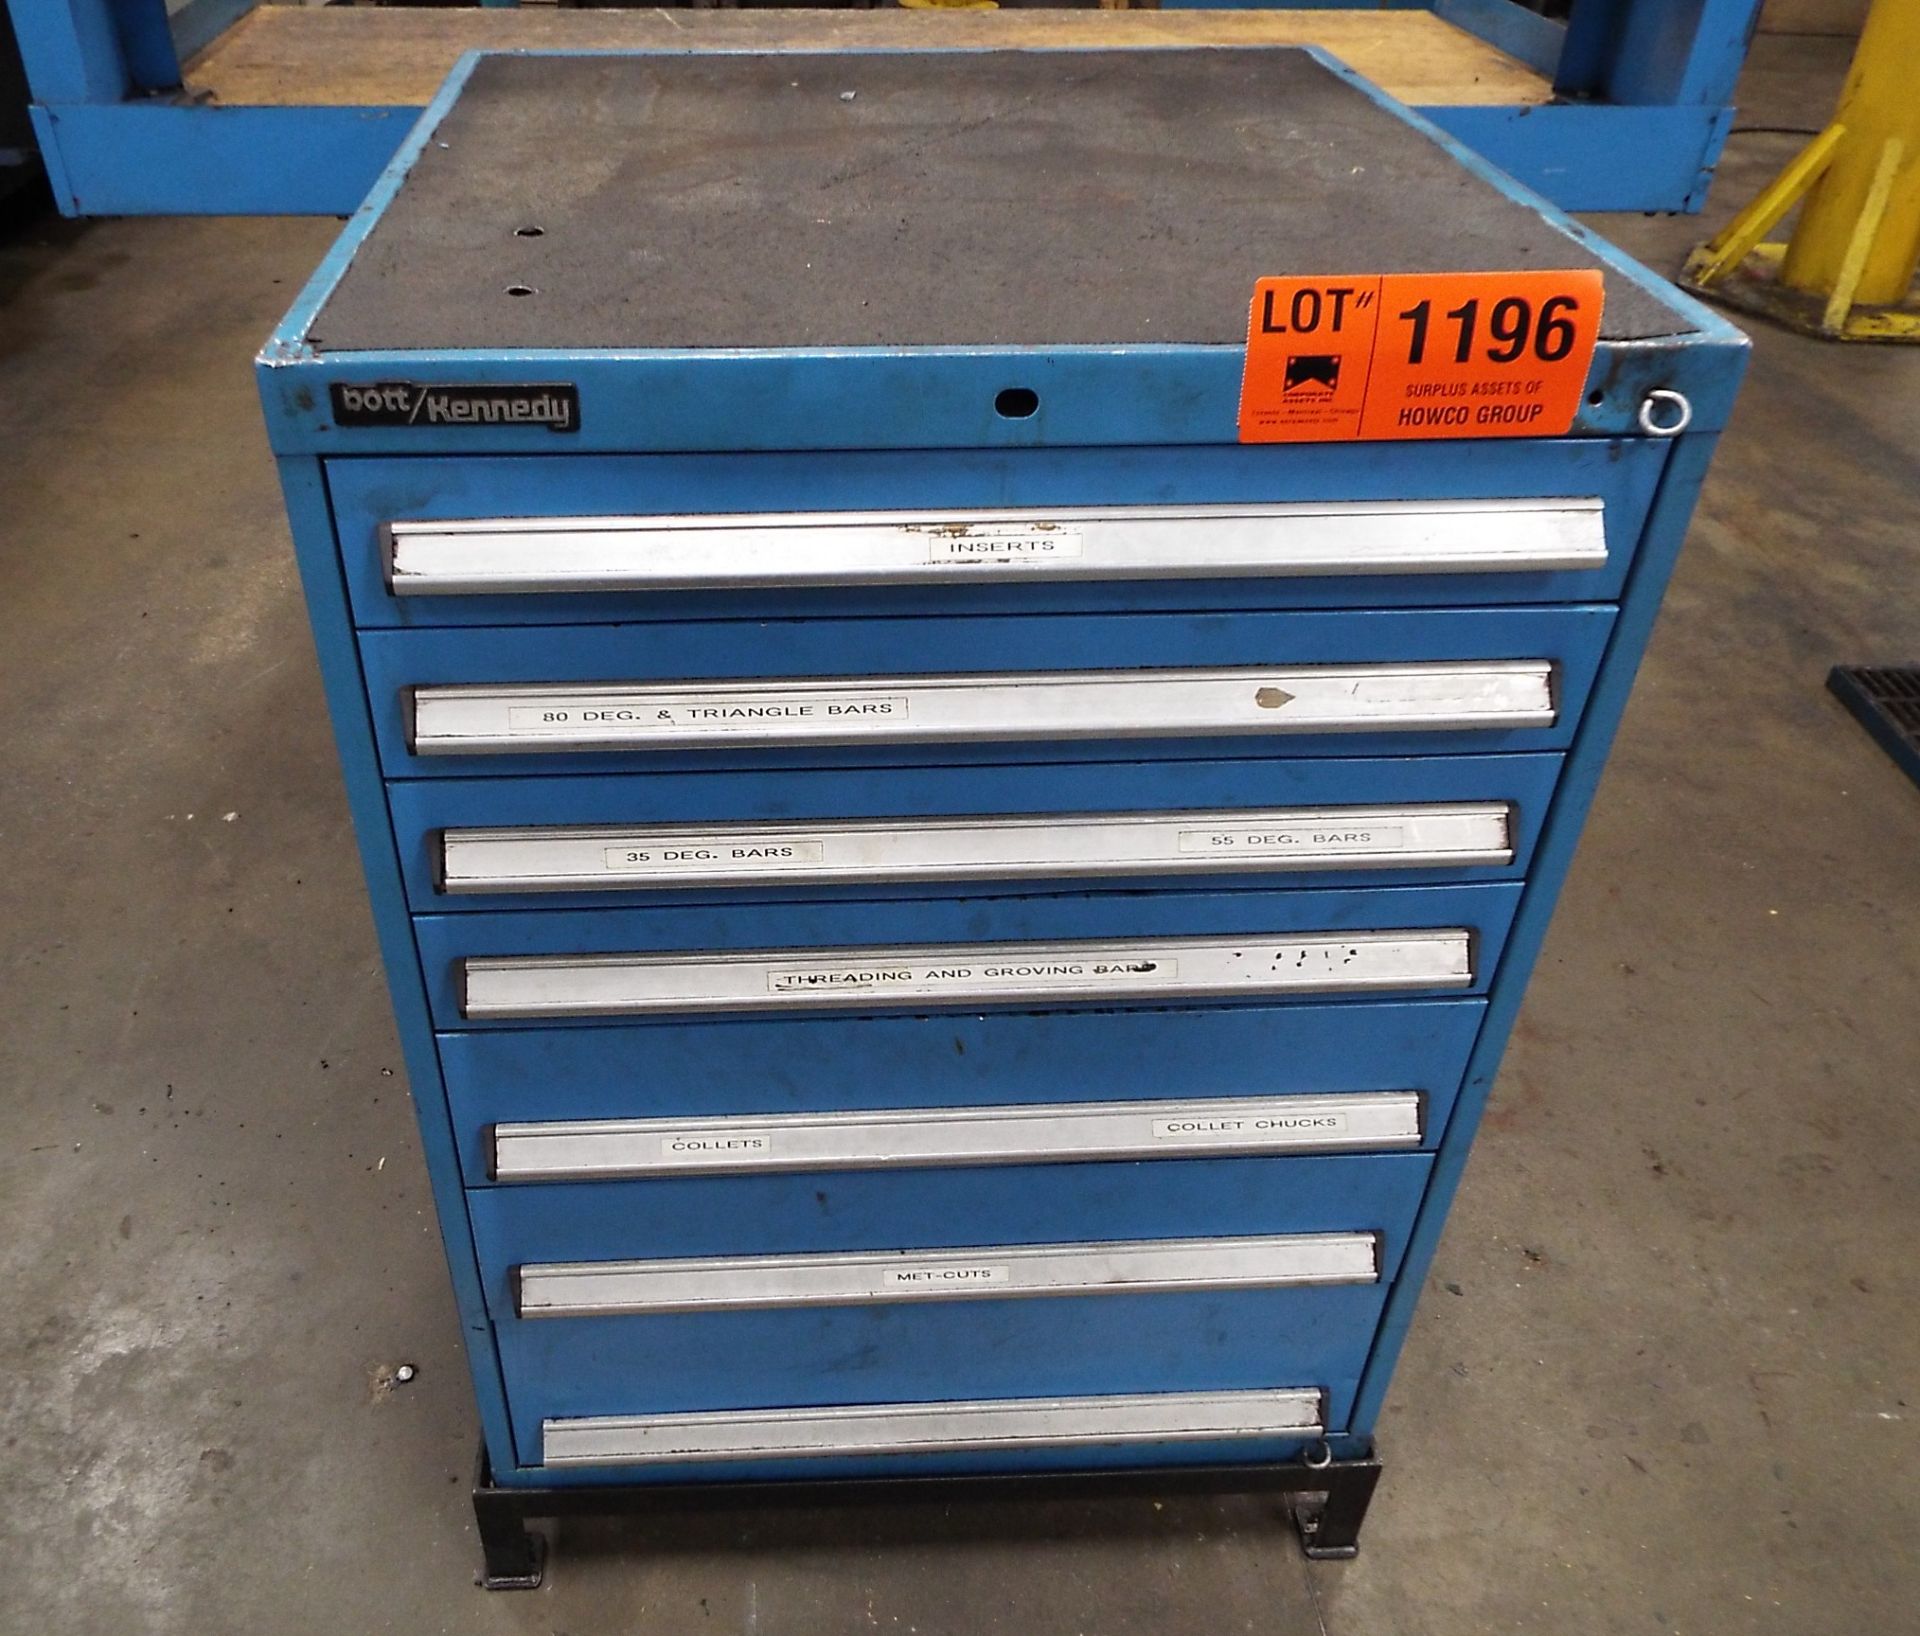 BOTT/KENNEDY 7 DRAWER TOOL CABINET (DELAYED DELIVERY)